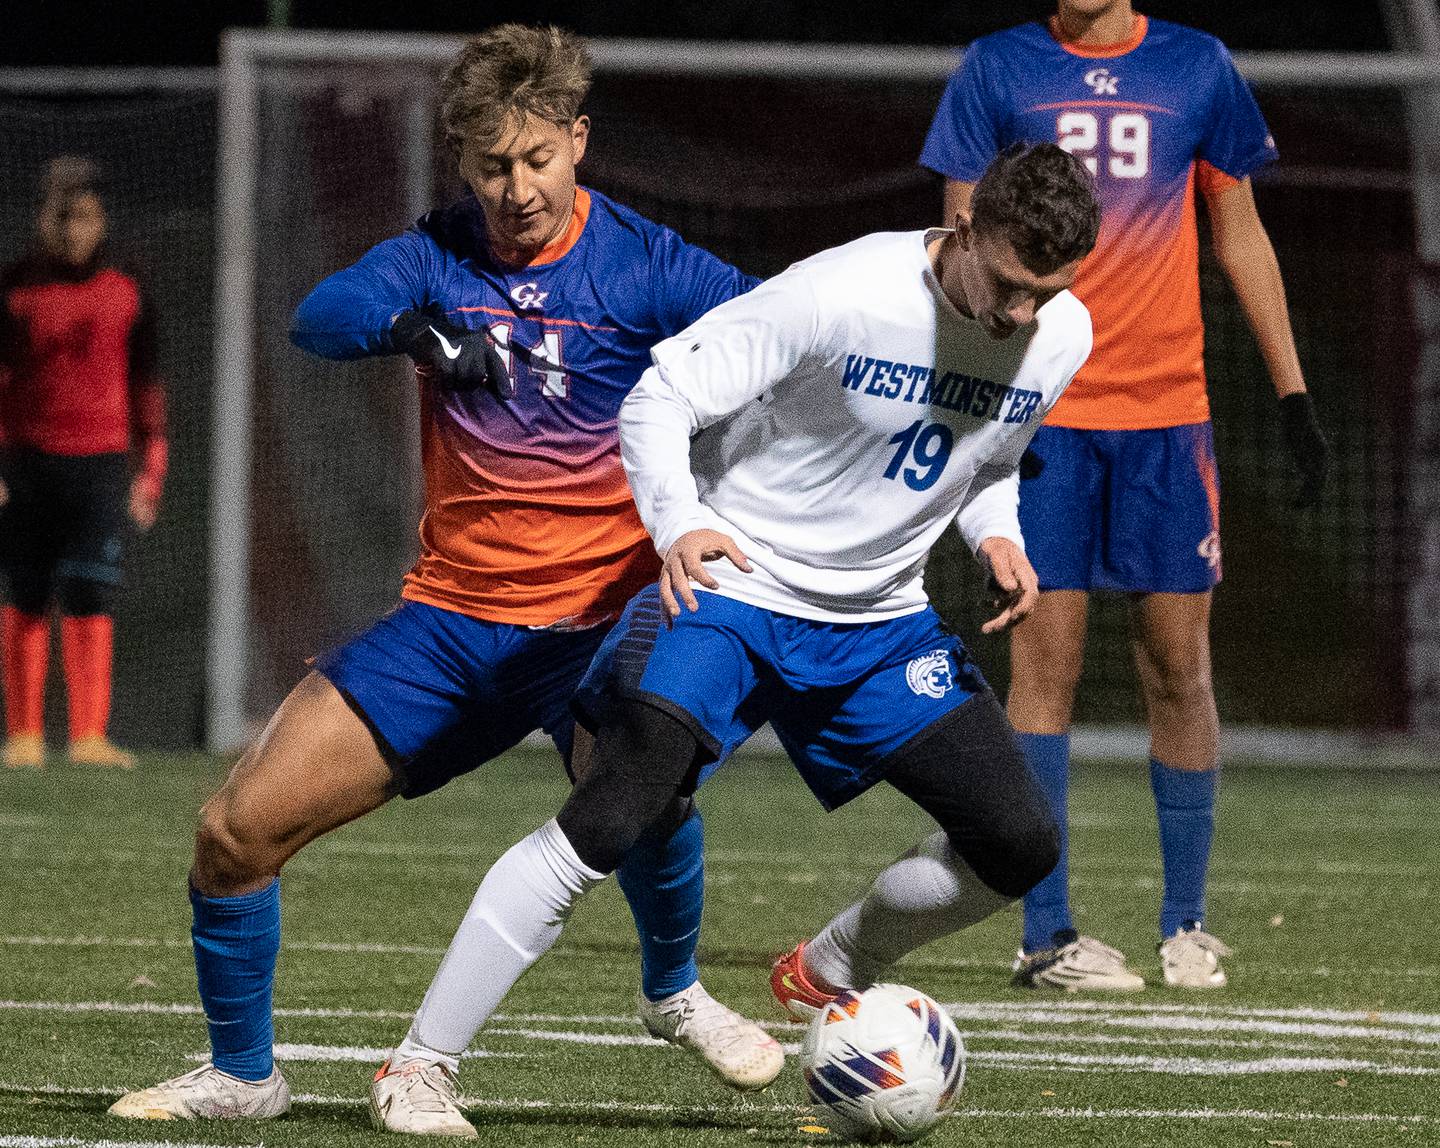 Westminster Christian's Peter DiNapoli (19) plays the ball against Genoa-Kingston's Diego Espinoza (14) during a Wheaton Academy 1A sectional semifinal match at Wheaton Academy on Tuesday, Oct 18, 2022.